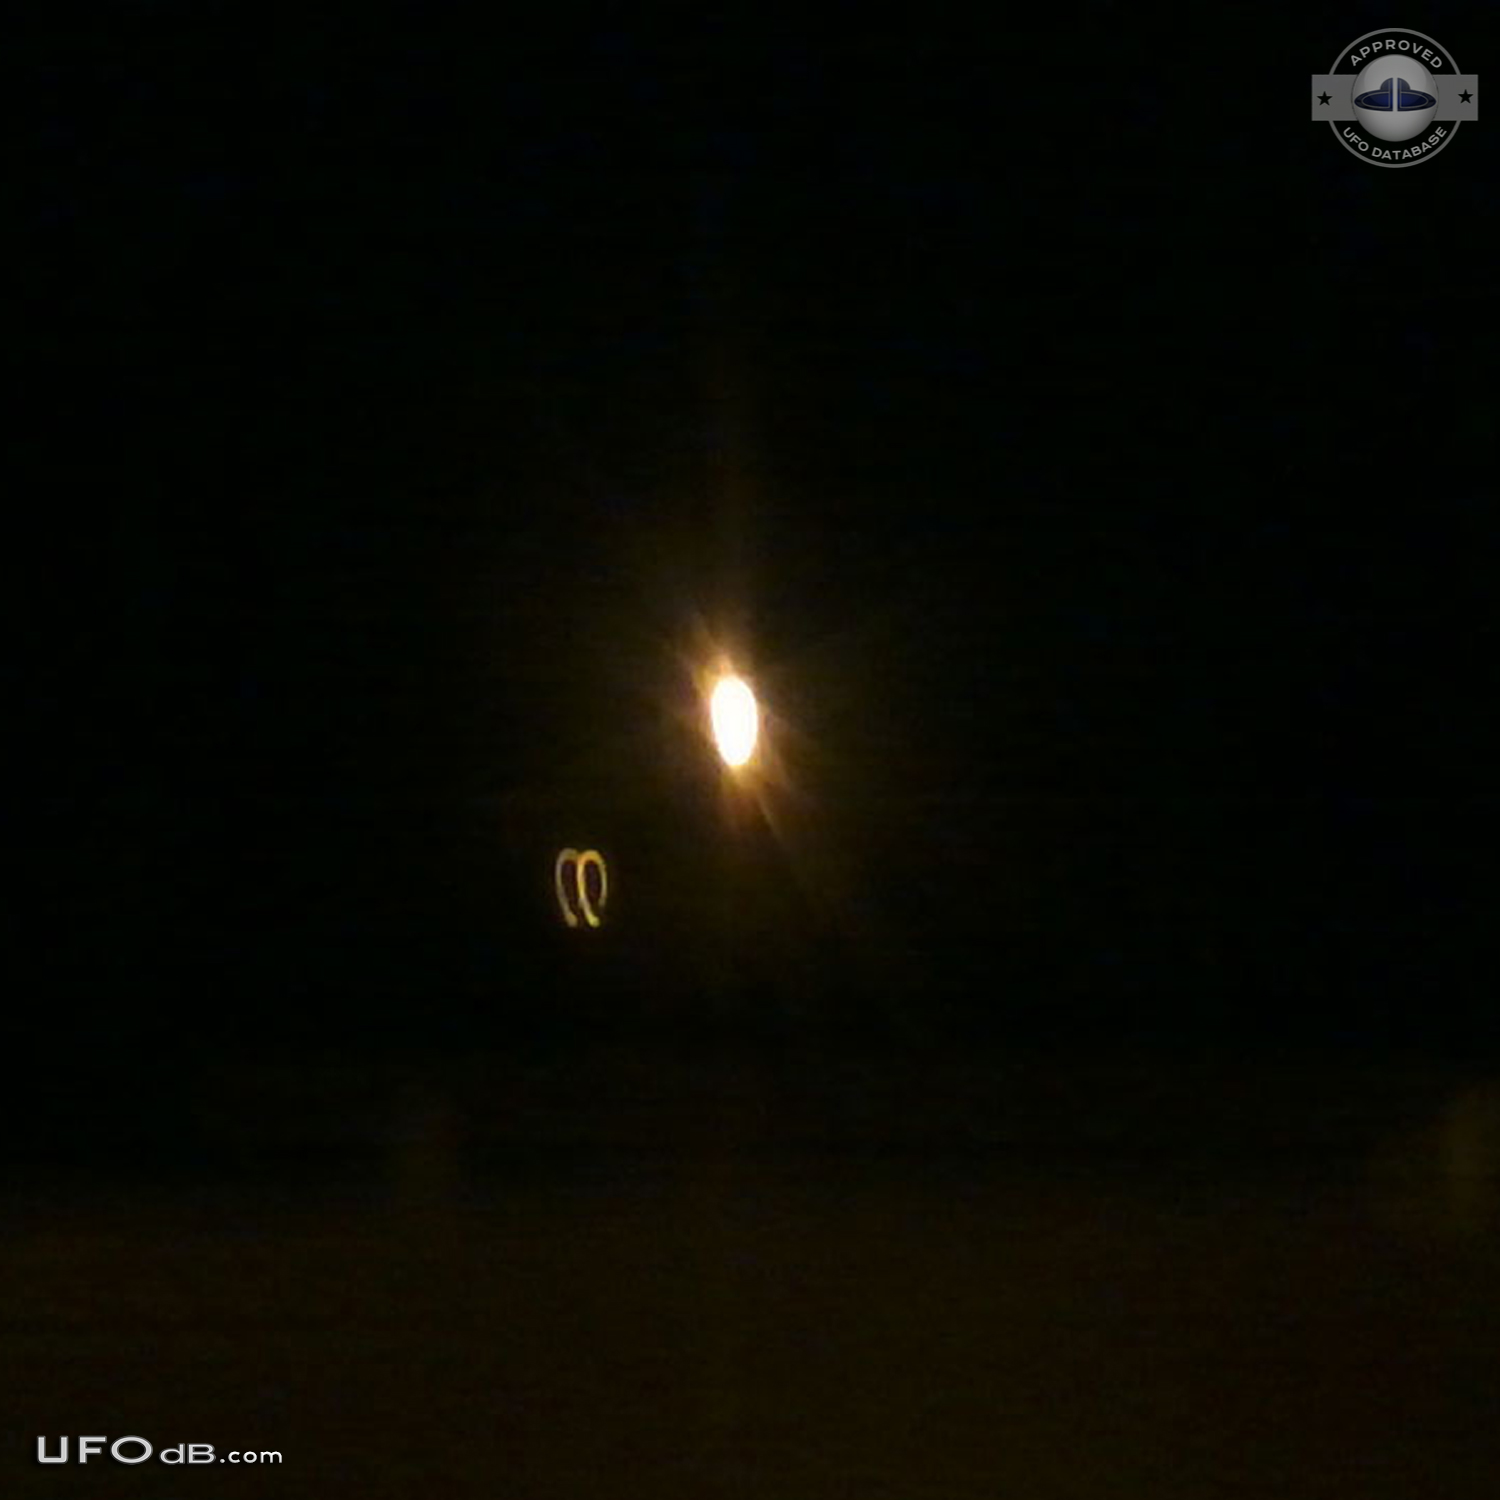 Two Jets follow UFO near Great Falls in Montana USA 2015 UFO Picture #644-2